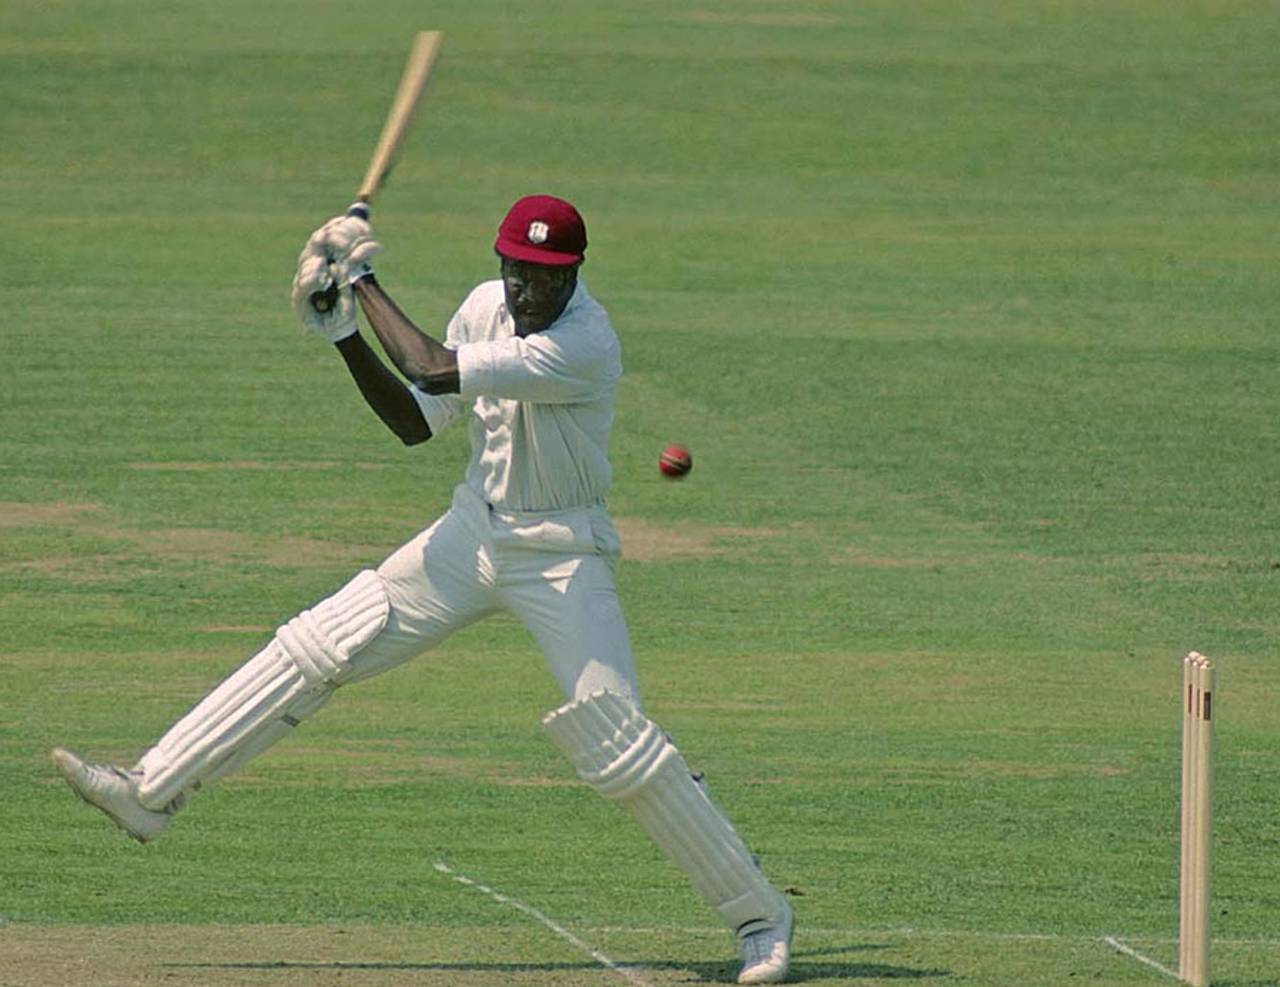 Clive Lloyd slashes hard during his century, Australia v West Indies, Final, Lord's, World Cup 1975, June 21, 1975